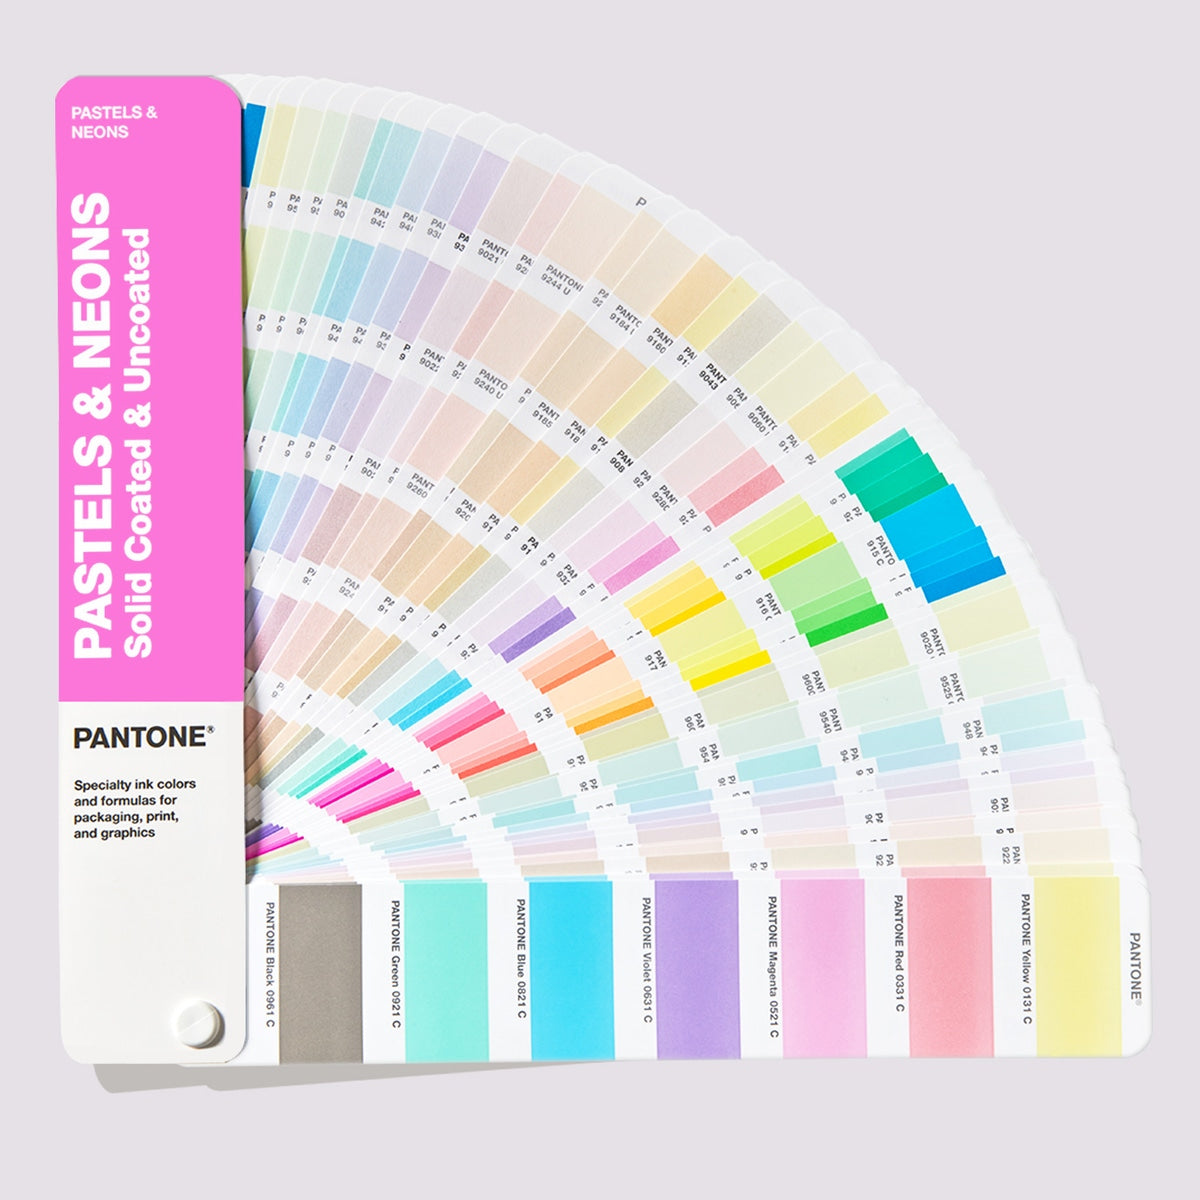 PANTONE PASTELS & NEONS GUIDE | COATED & UNCOATED